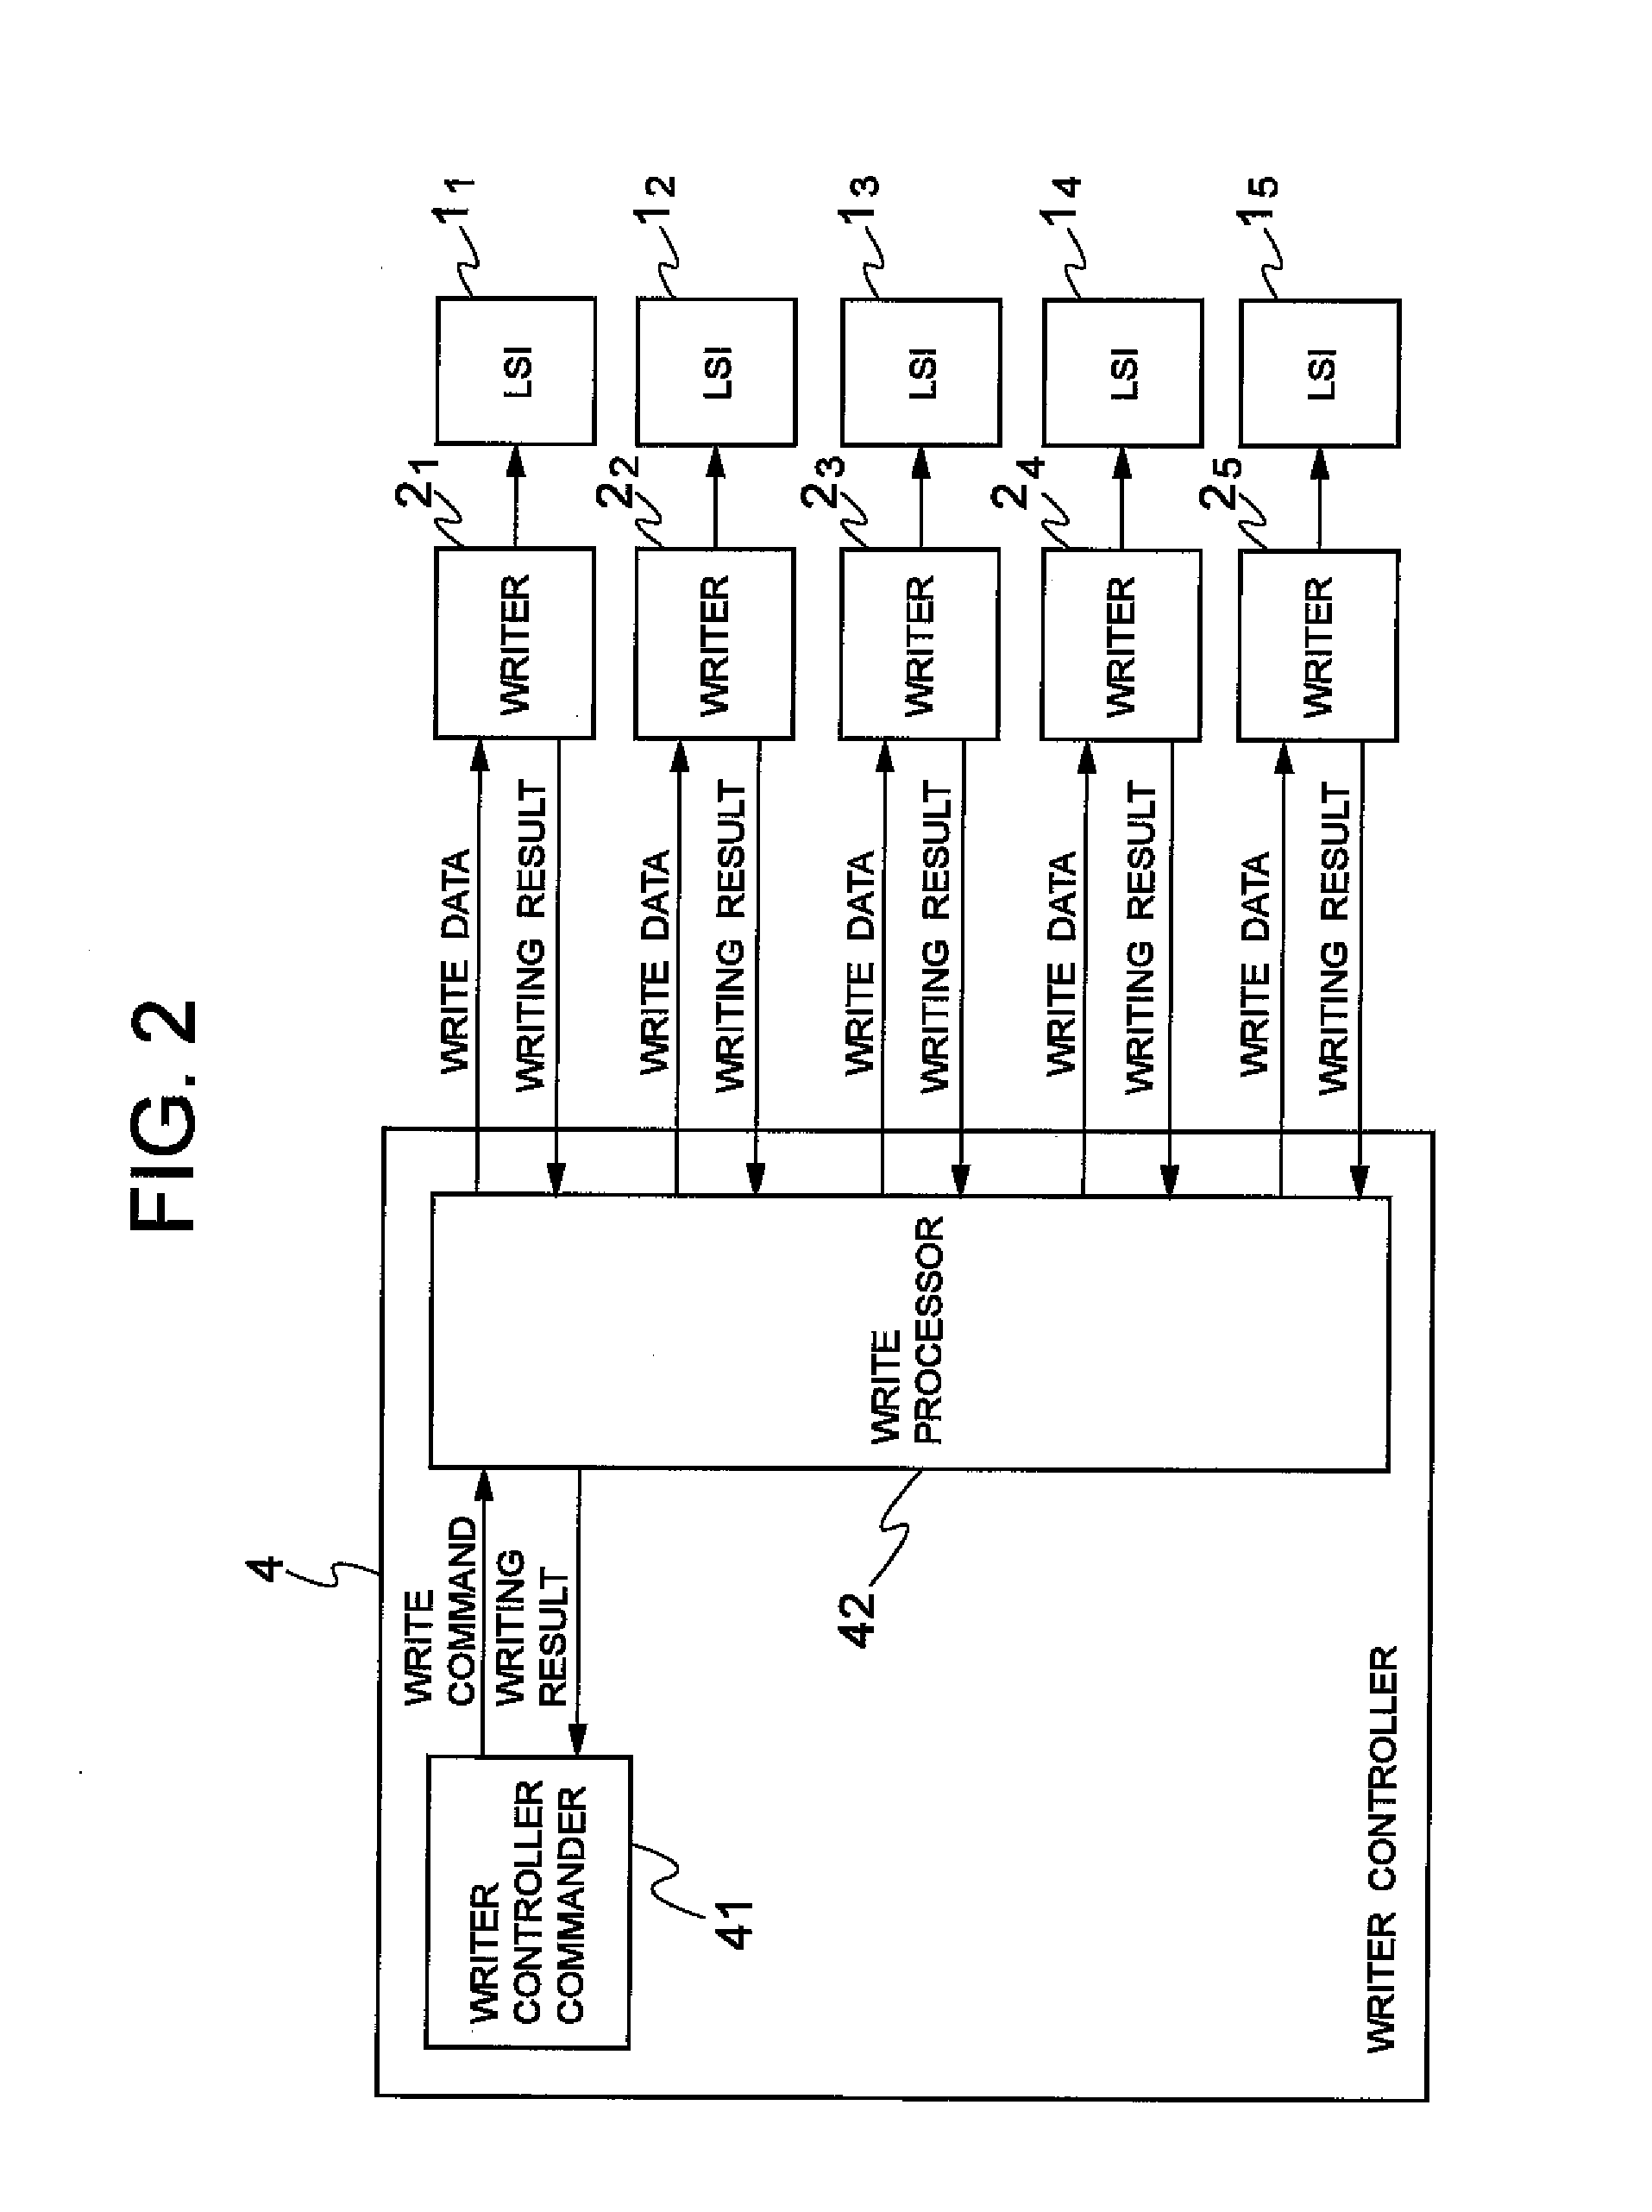 Memory writing system and method